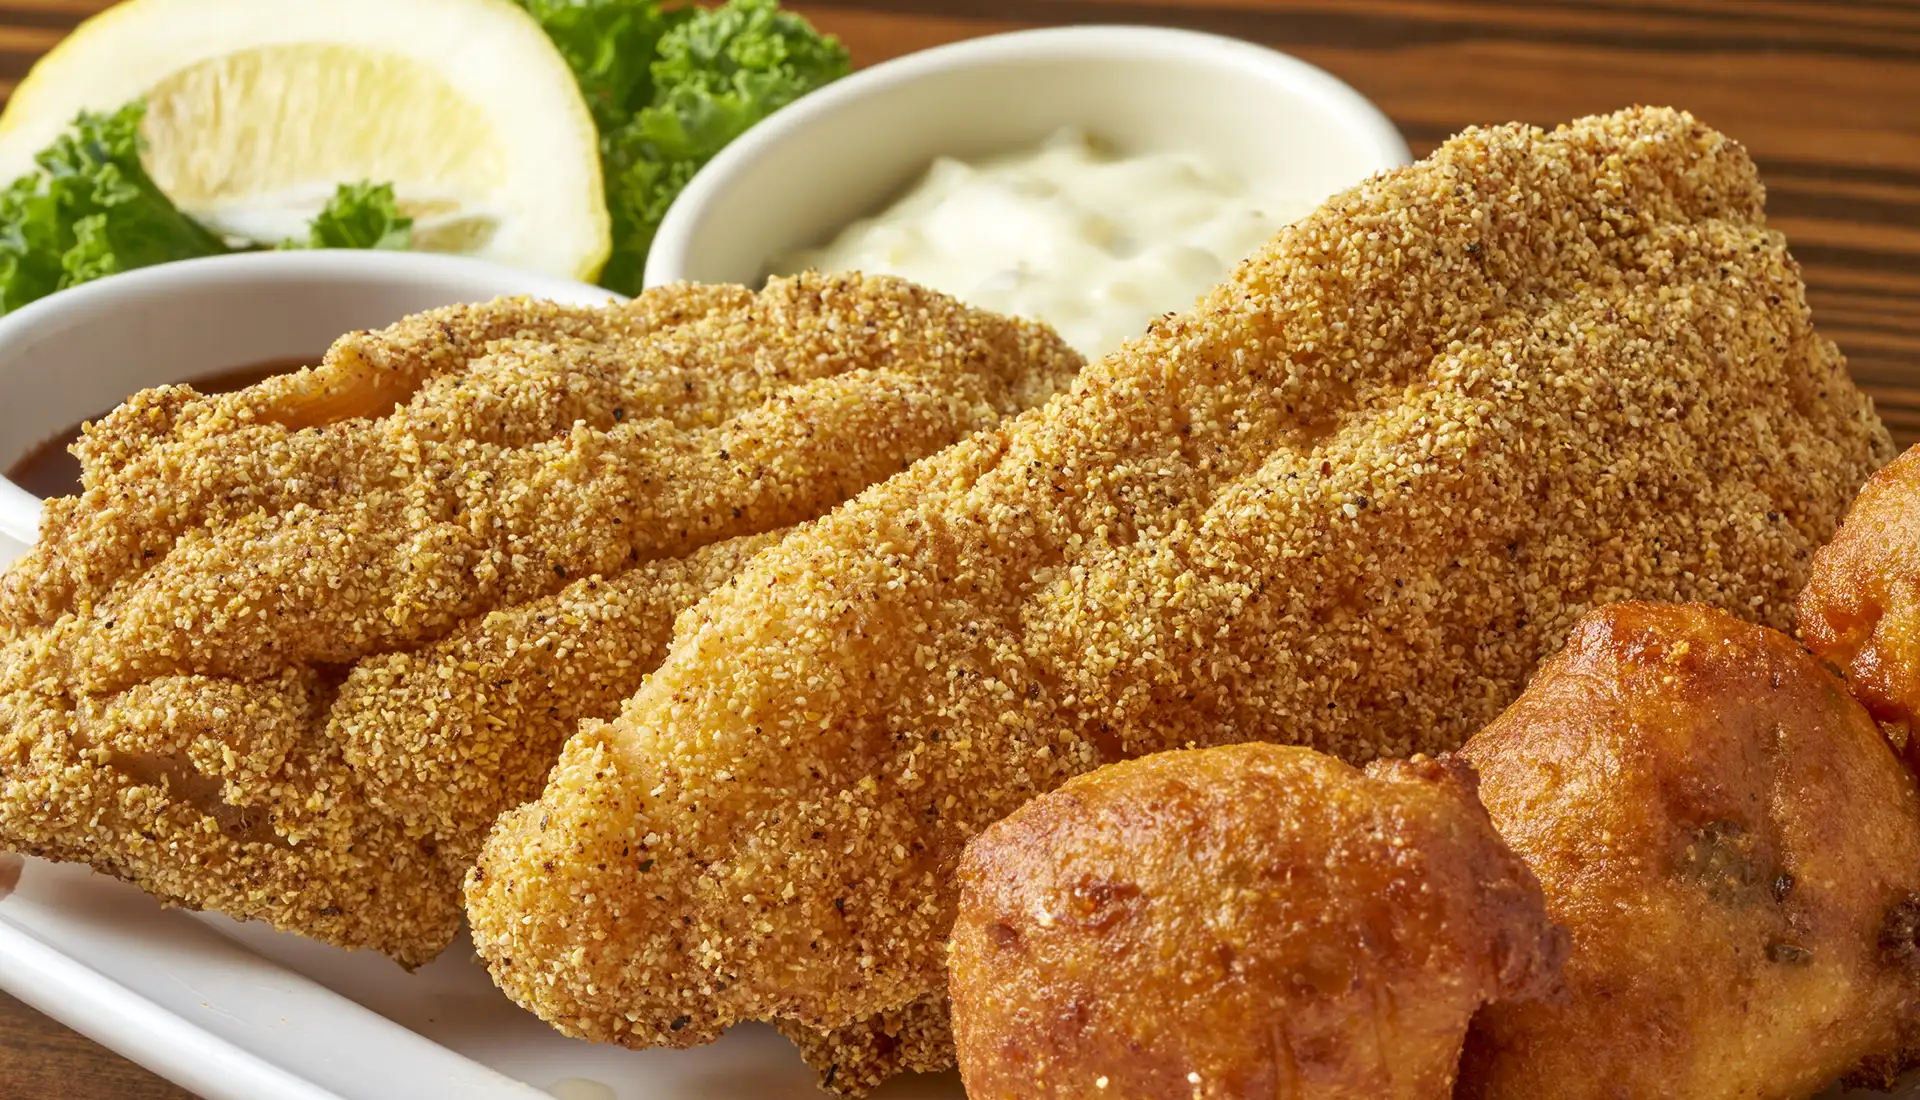 Farmed raised catfish lightly breaded in our corn meal. Served with two sides dishes.